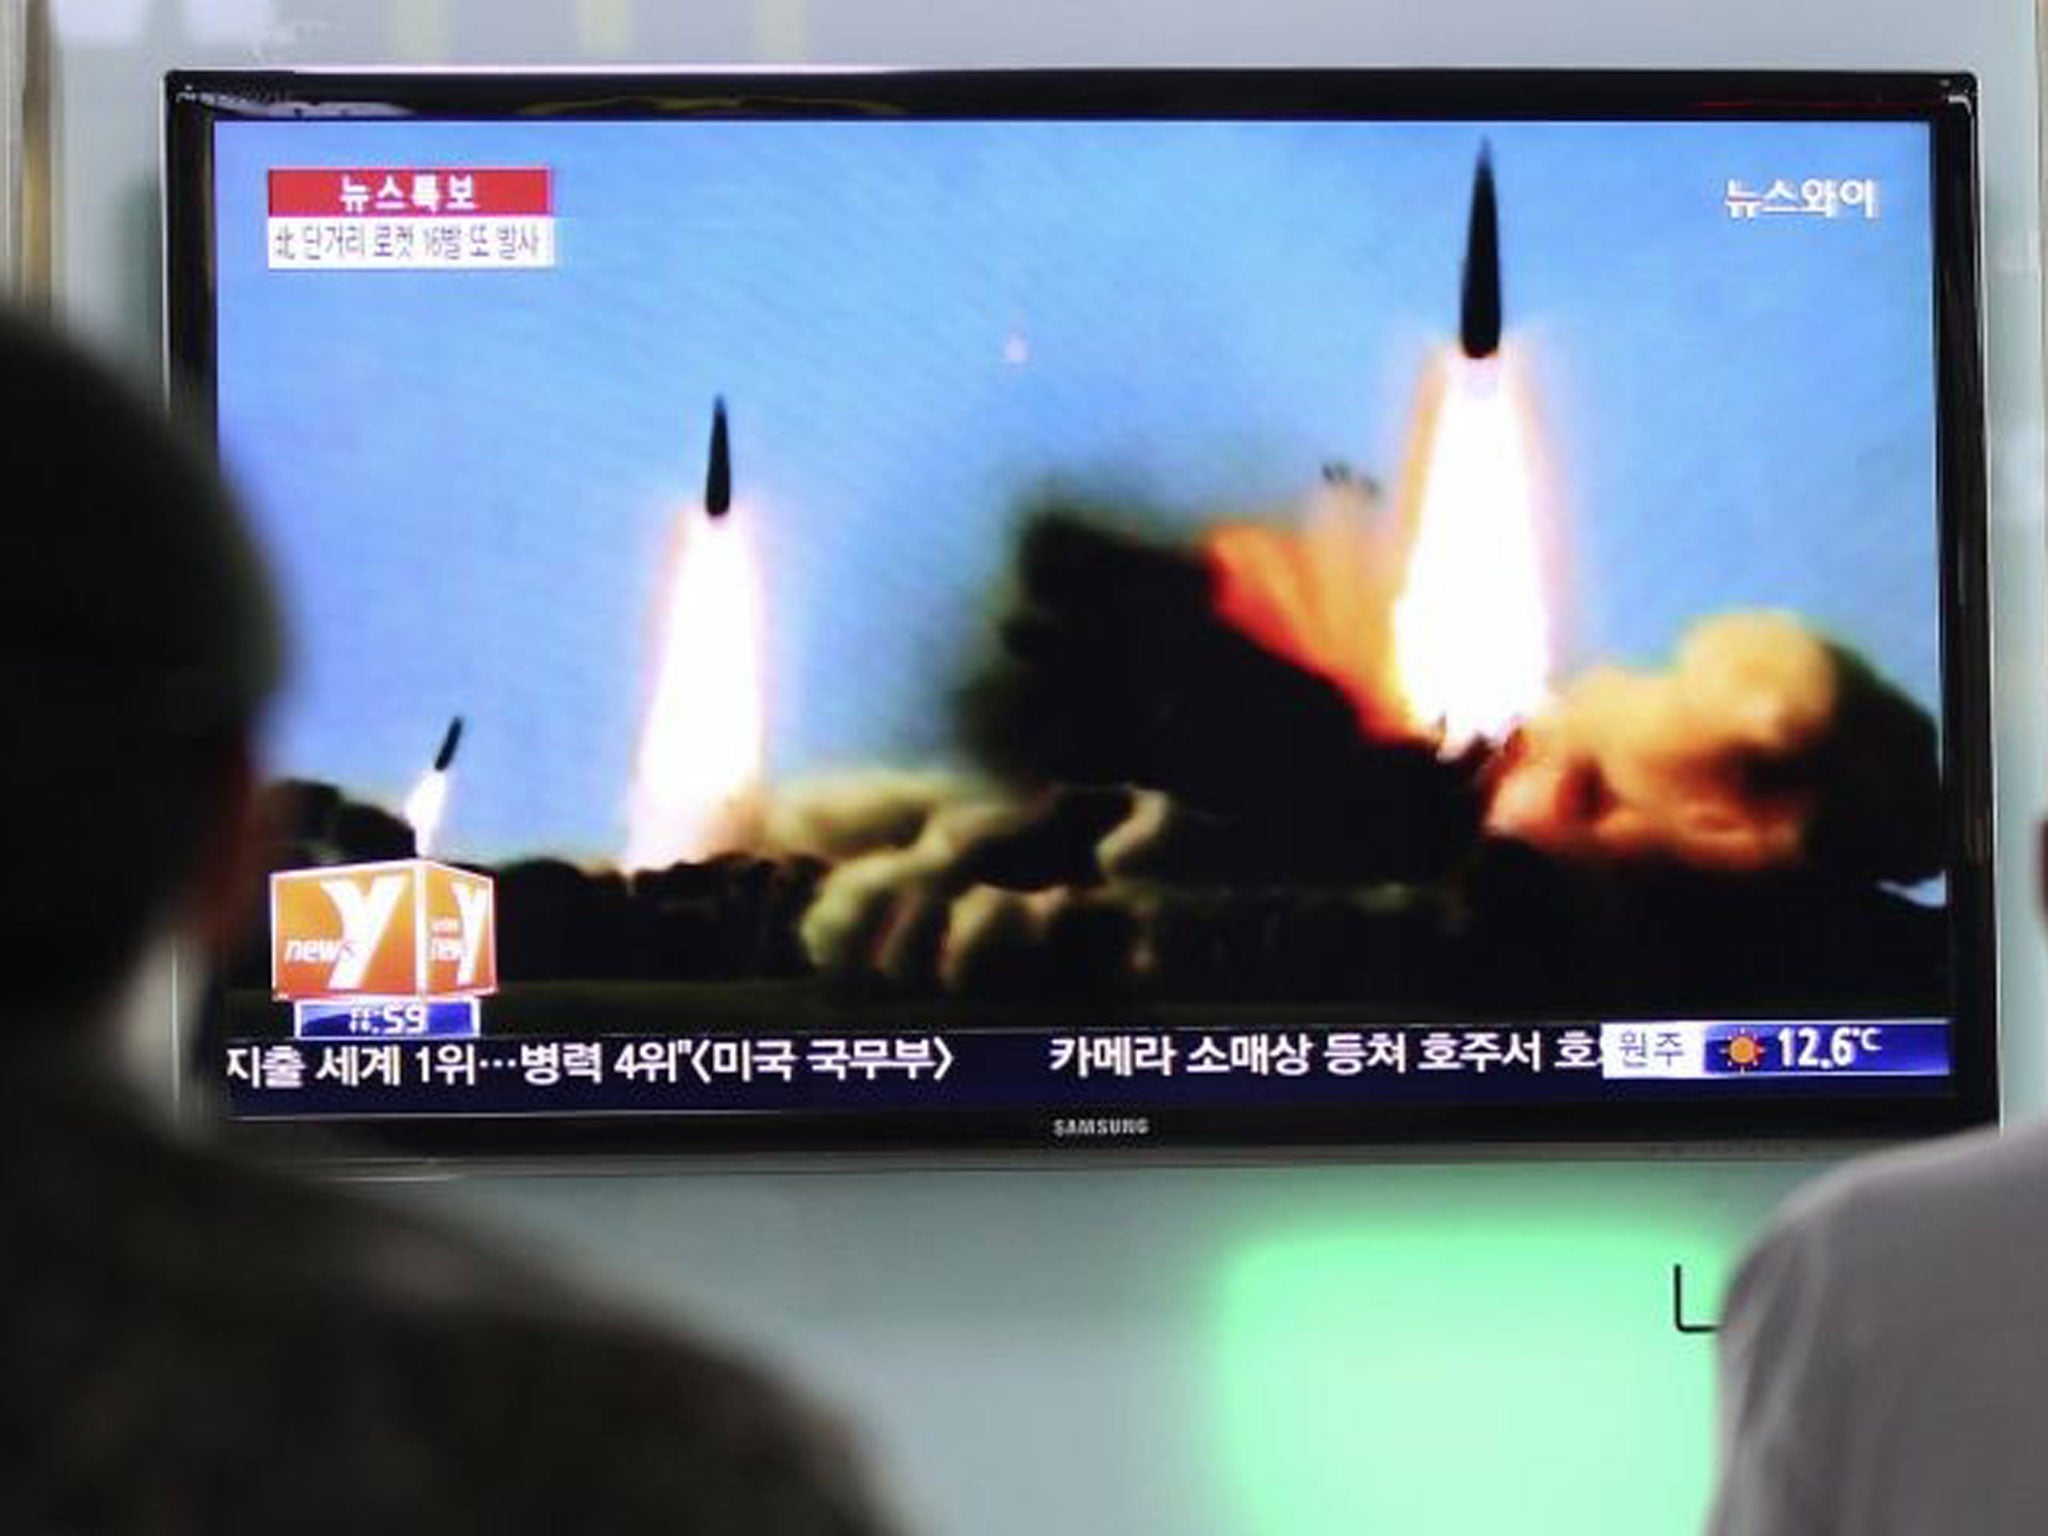 People in Seoul watch a news programme showing rockets launched by Pyongyang